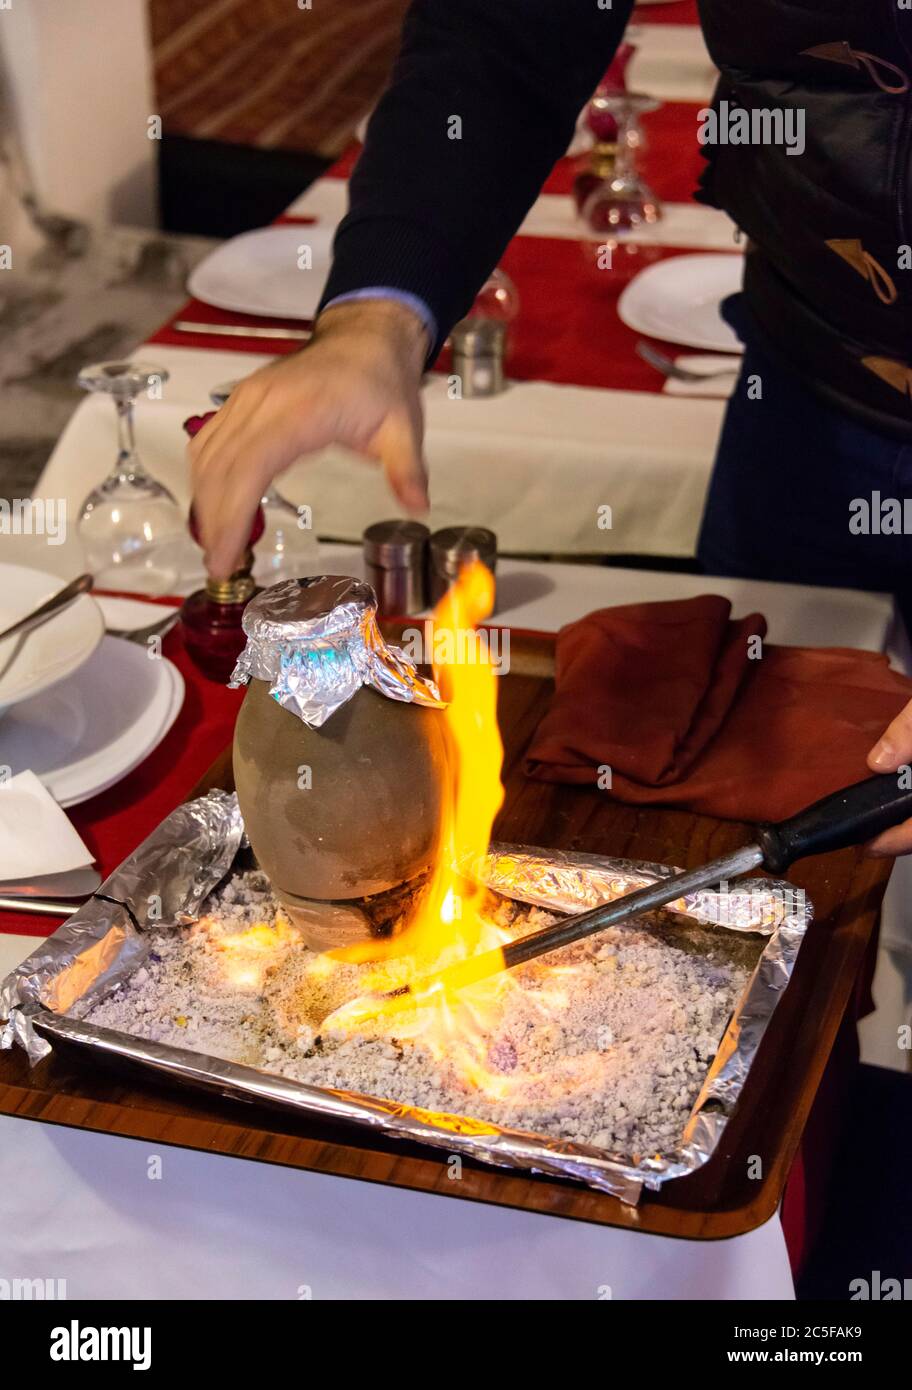 Testi Kebab is served with fire in a restaurant, Kebab braised in an earthenware pot, typical Turkish dish from Cappadocia, Istanbul, Turkey Stock Photo